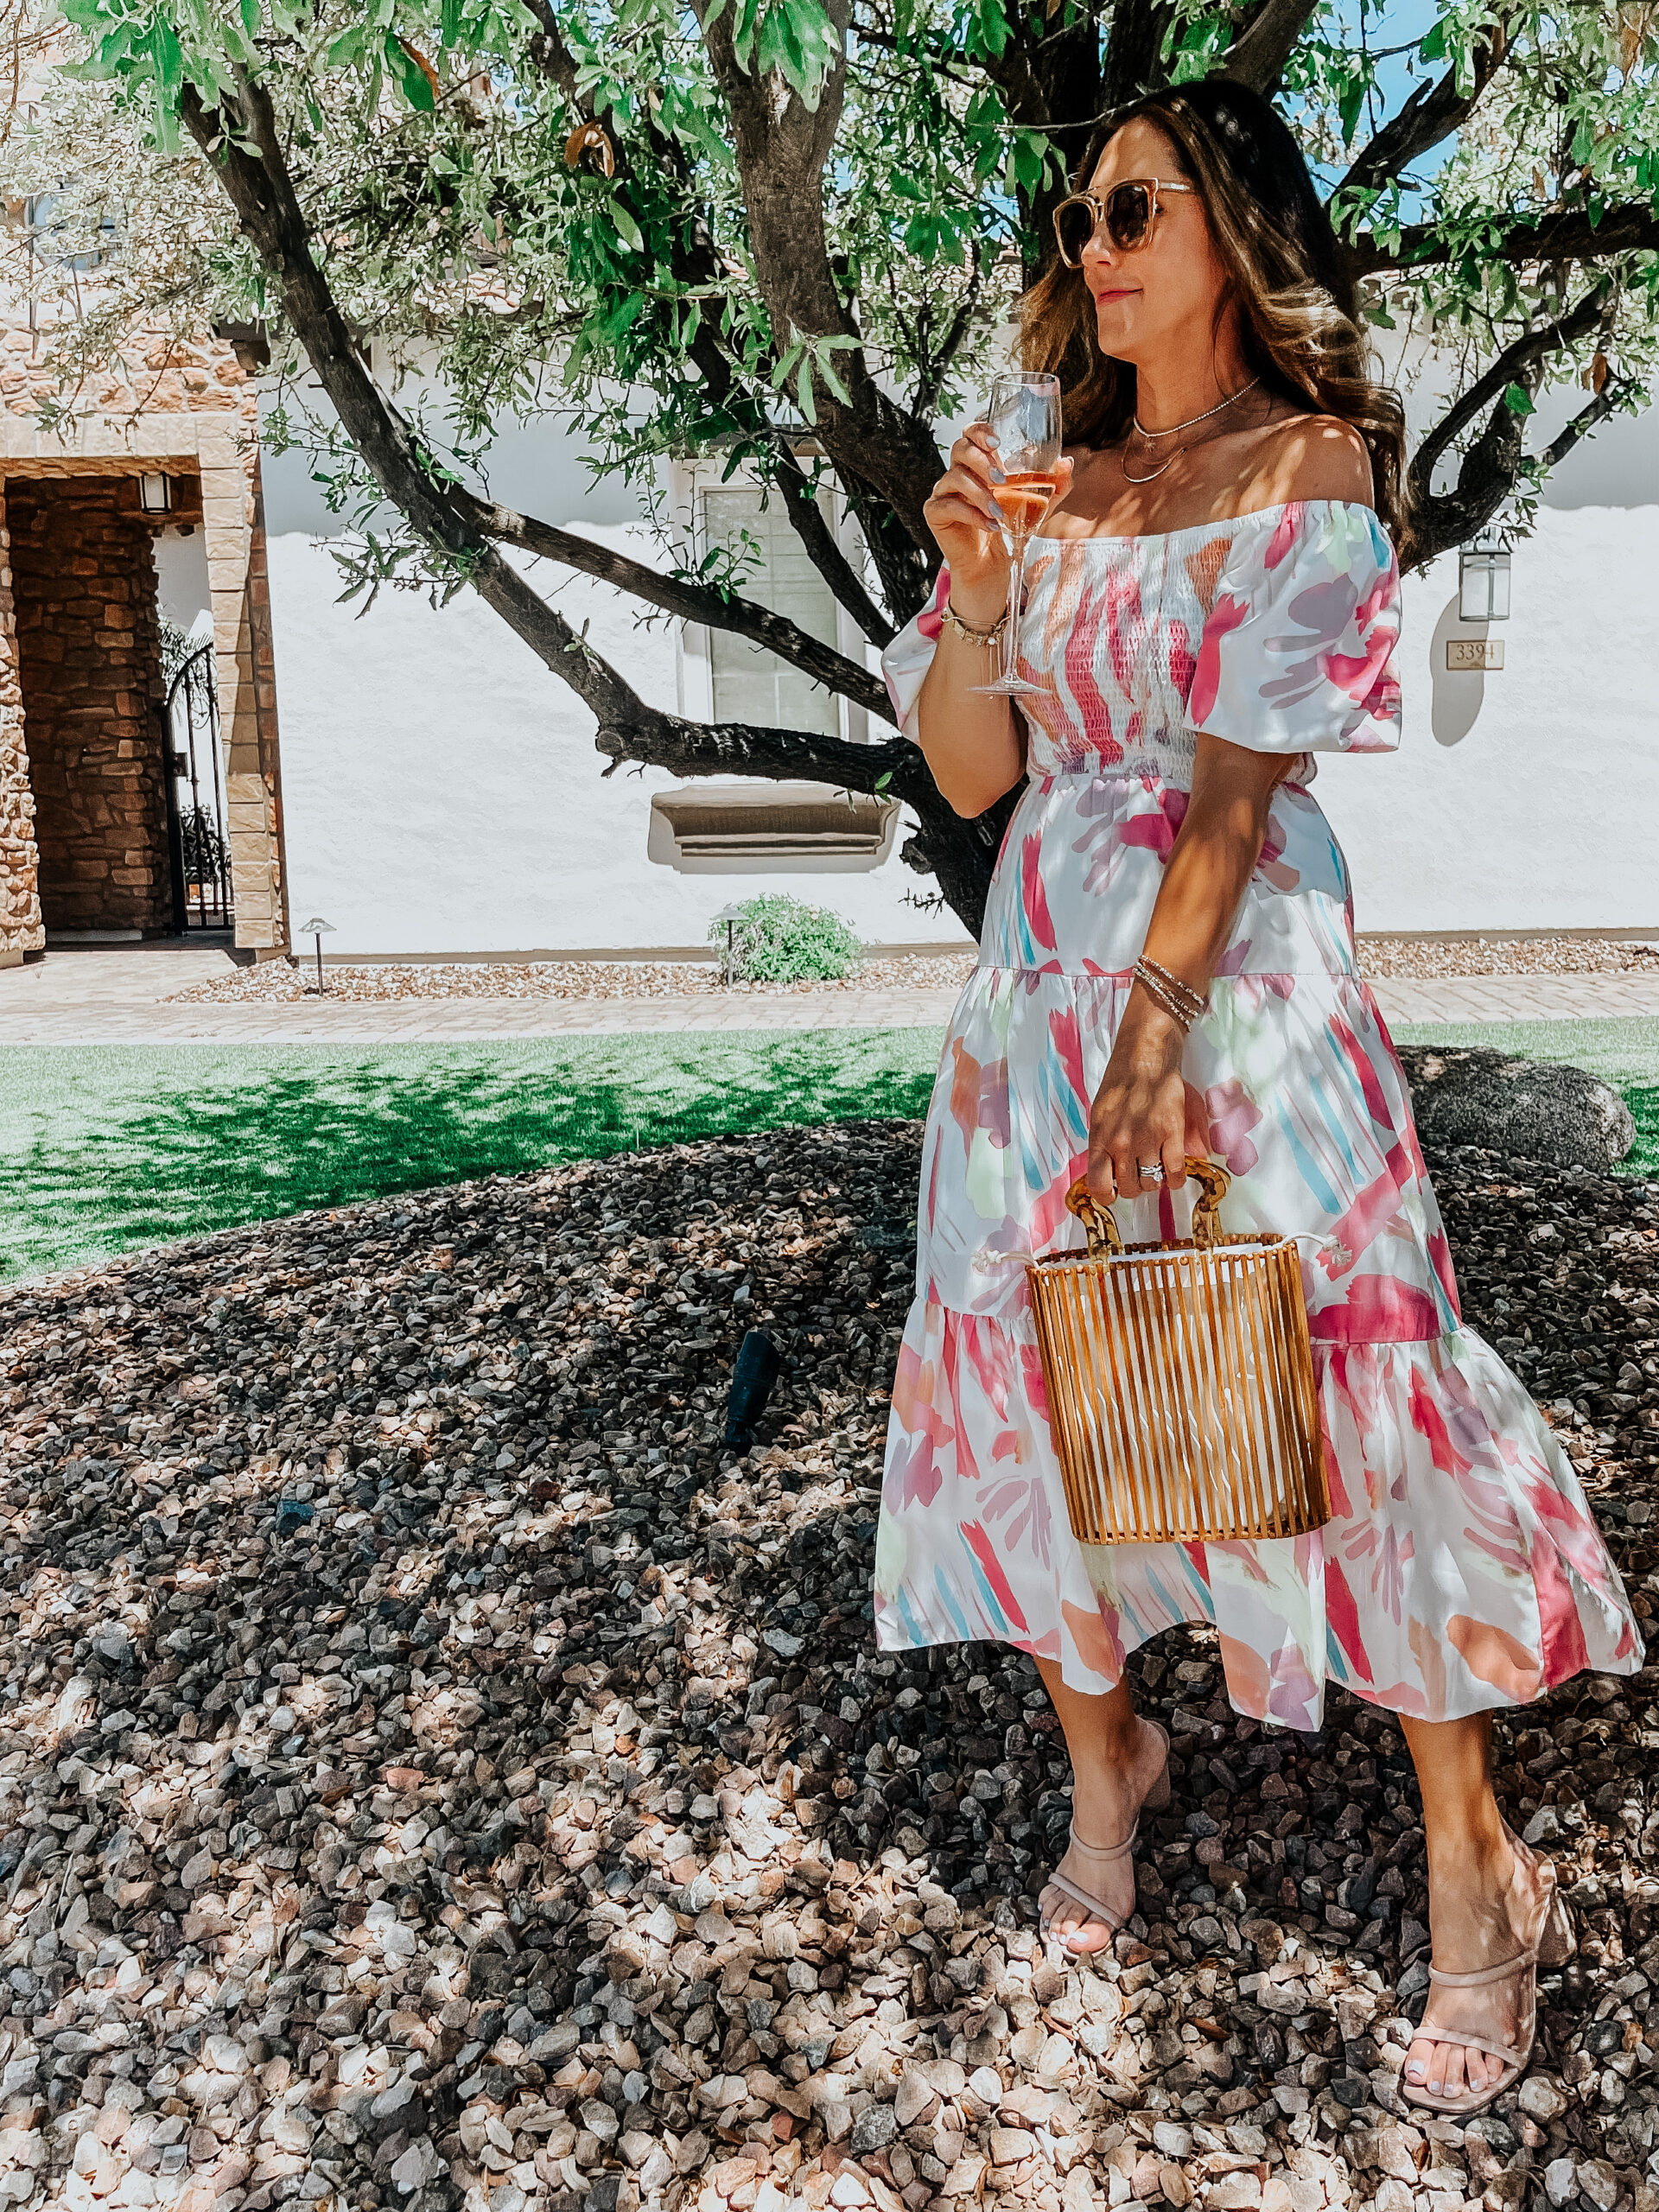 Easter dress - what to wear on Easter - What to wear for Easter - This is our Bliss #easterdress #easteroutfitinspo